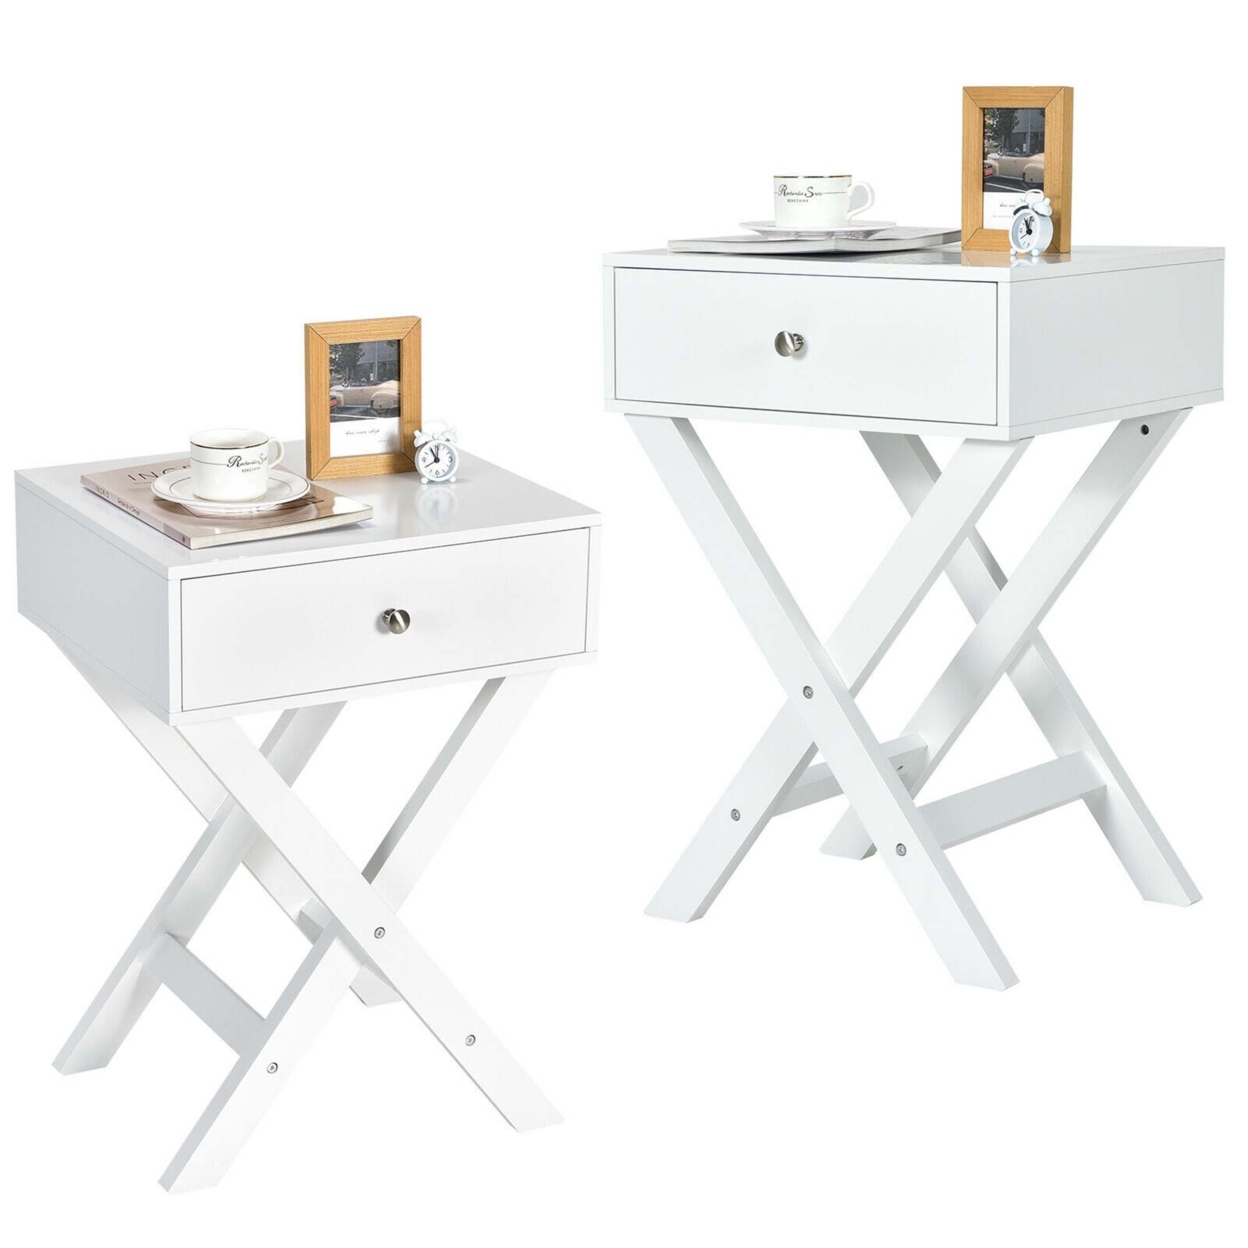 Set Of 2 X-Shaped Nightstand Side End Table Bedside Table W/ Drawer - White